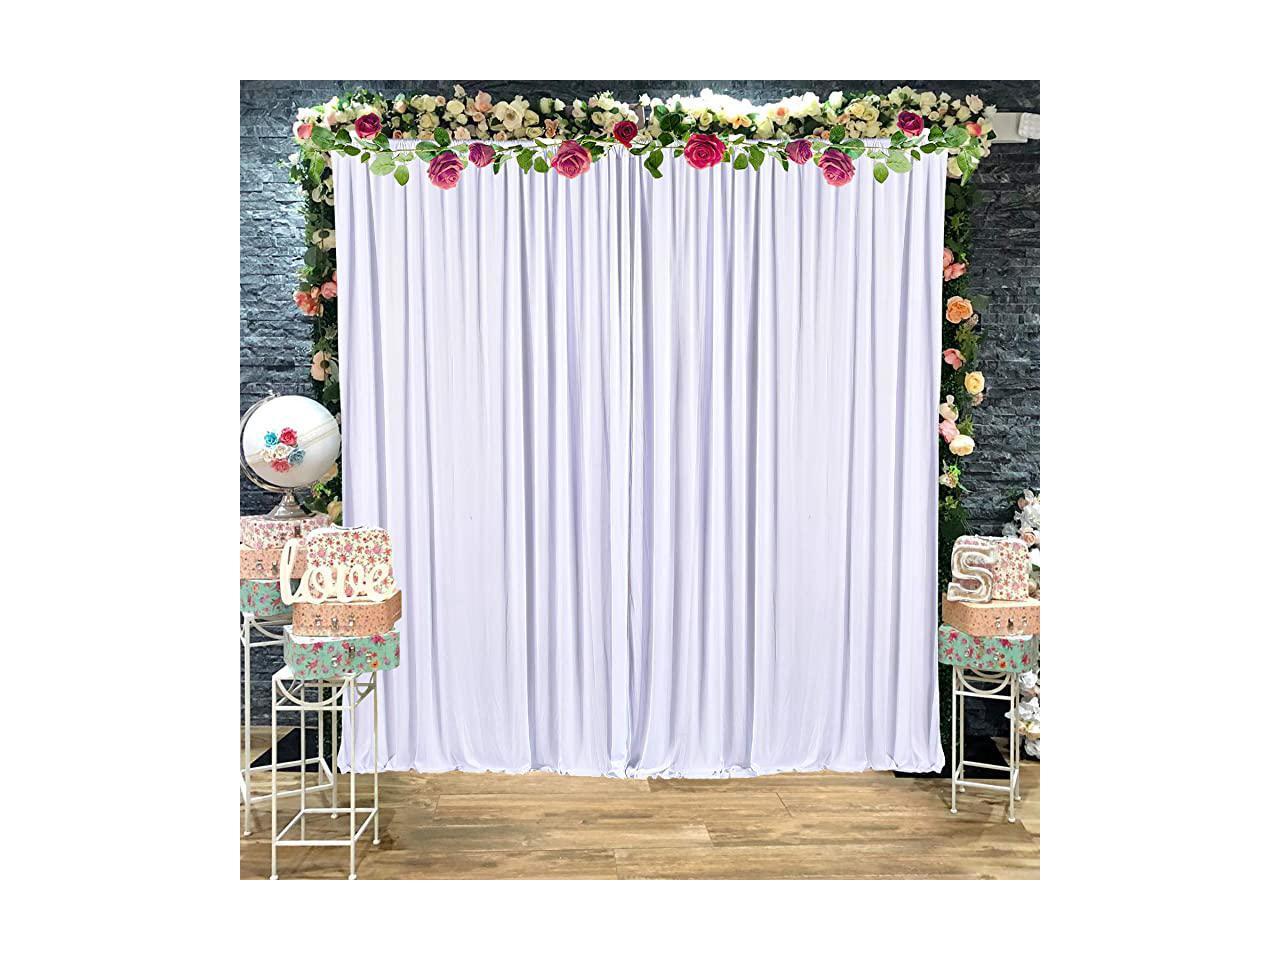 White Backdrop Curtain for Parties Photo Backdrop Wedding Baby Shower Photography Background with Gold Curtain Tiebacks 5ft x 10ft Pack of Two 